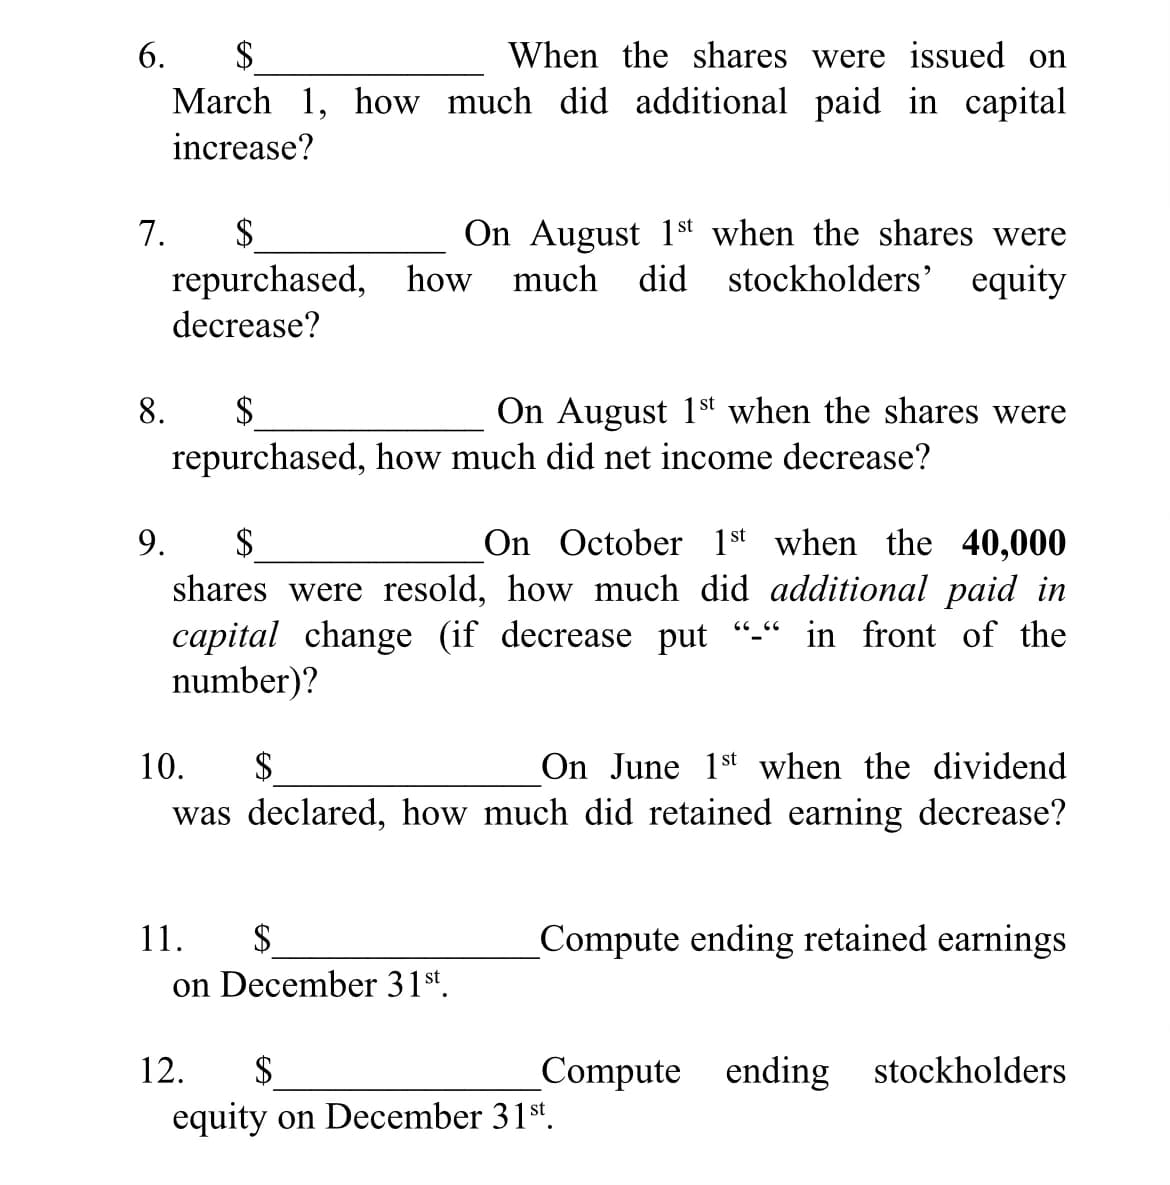 6.
$
When the shares were issued on
March 1, how much did additional paid in capital
increase?
7.
repurchased, how much
decrease?
On August 1st when the shares were
did stockholders' equity
$
8.
$
On August 1st when the shares were
repurchased, how much did net income decrease?
9.
$
On October 1st when the 40,000
shares were resold, how much did additional paid in
capital change (if decrease put
number)?
in front of the
On June 1st when the dividend
was declared, how much did retained earning decrease?
10.
$
11.
$
Compute ending retained earnings
on December 31st.
12.
$
Compute ending stockholders
equity on December 31st.
